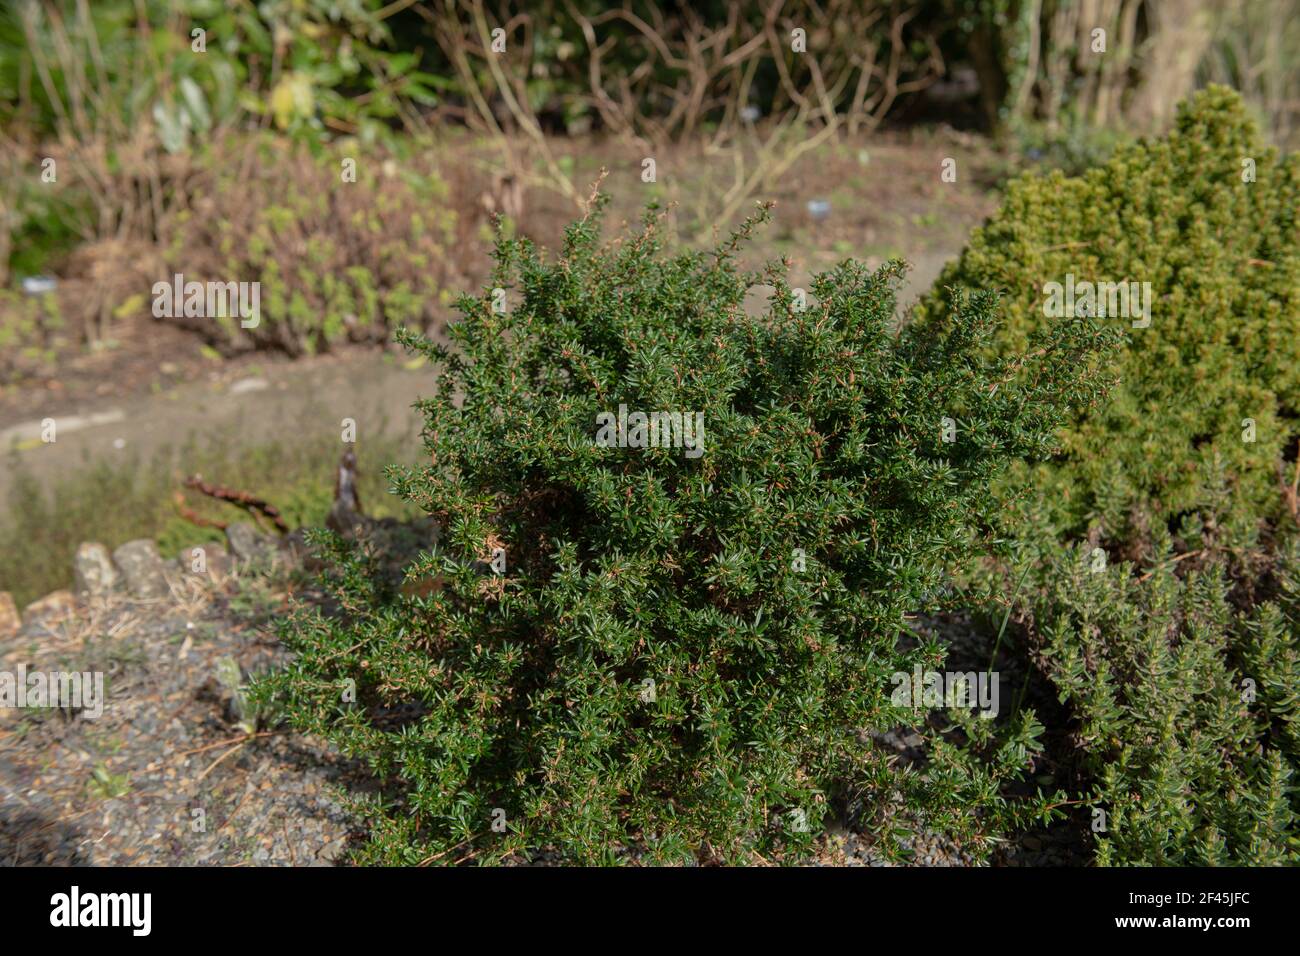 Spring Foliage and Flower Buds of the Compact Dwarf Golden Barberry Shrub (Berberis x stenophylla 'Corallina Compacta') Growing in a Rockery Garden Stock Photo